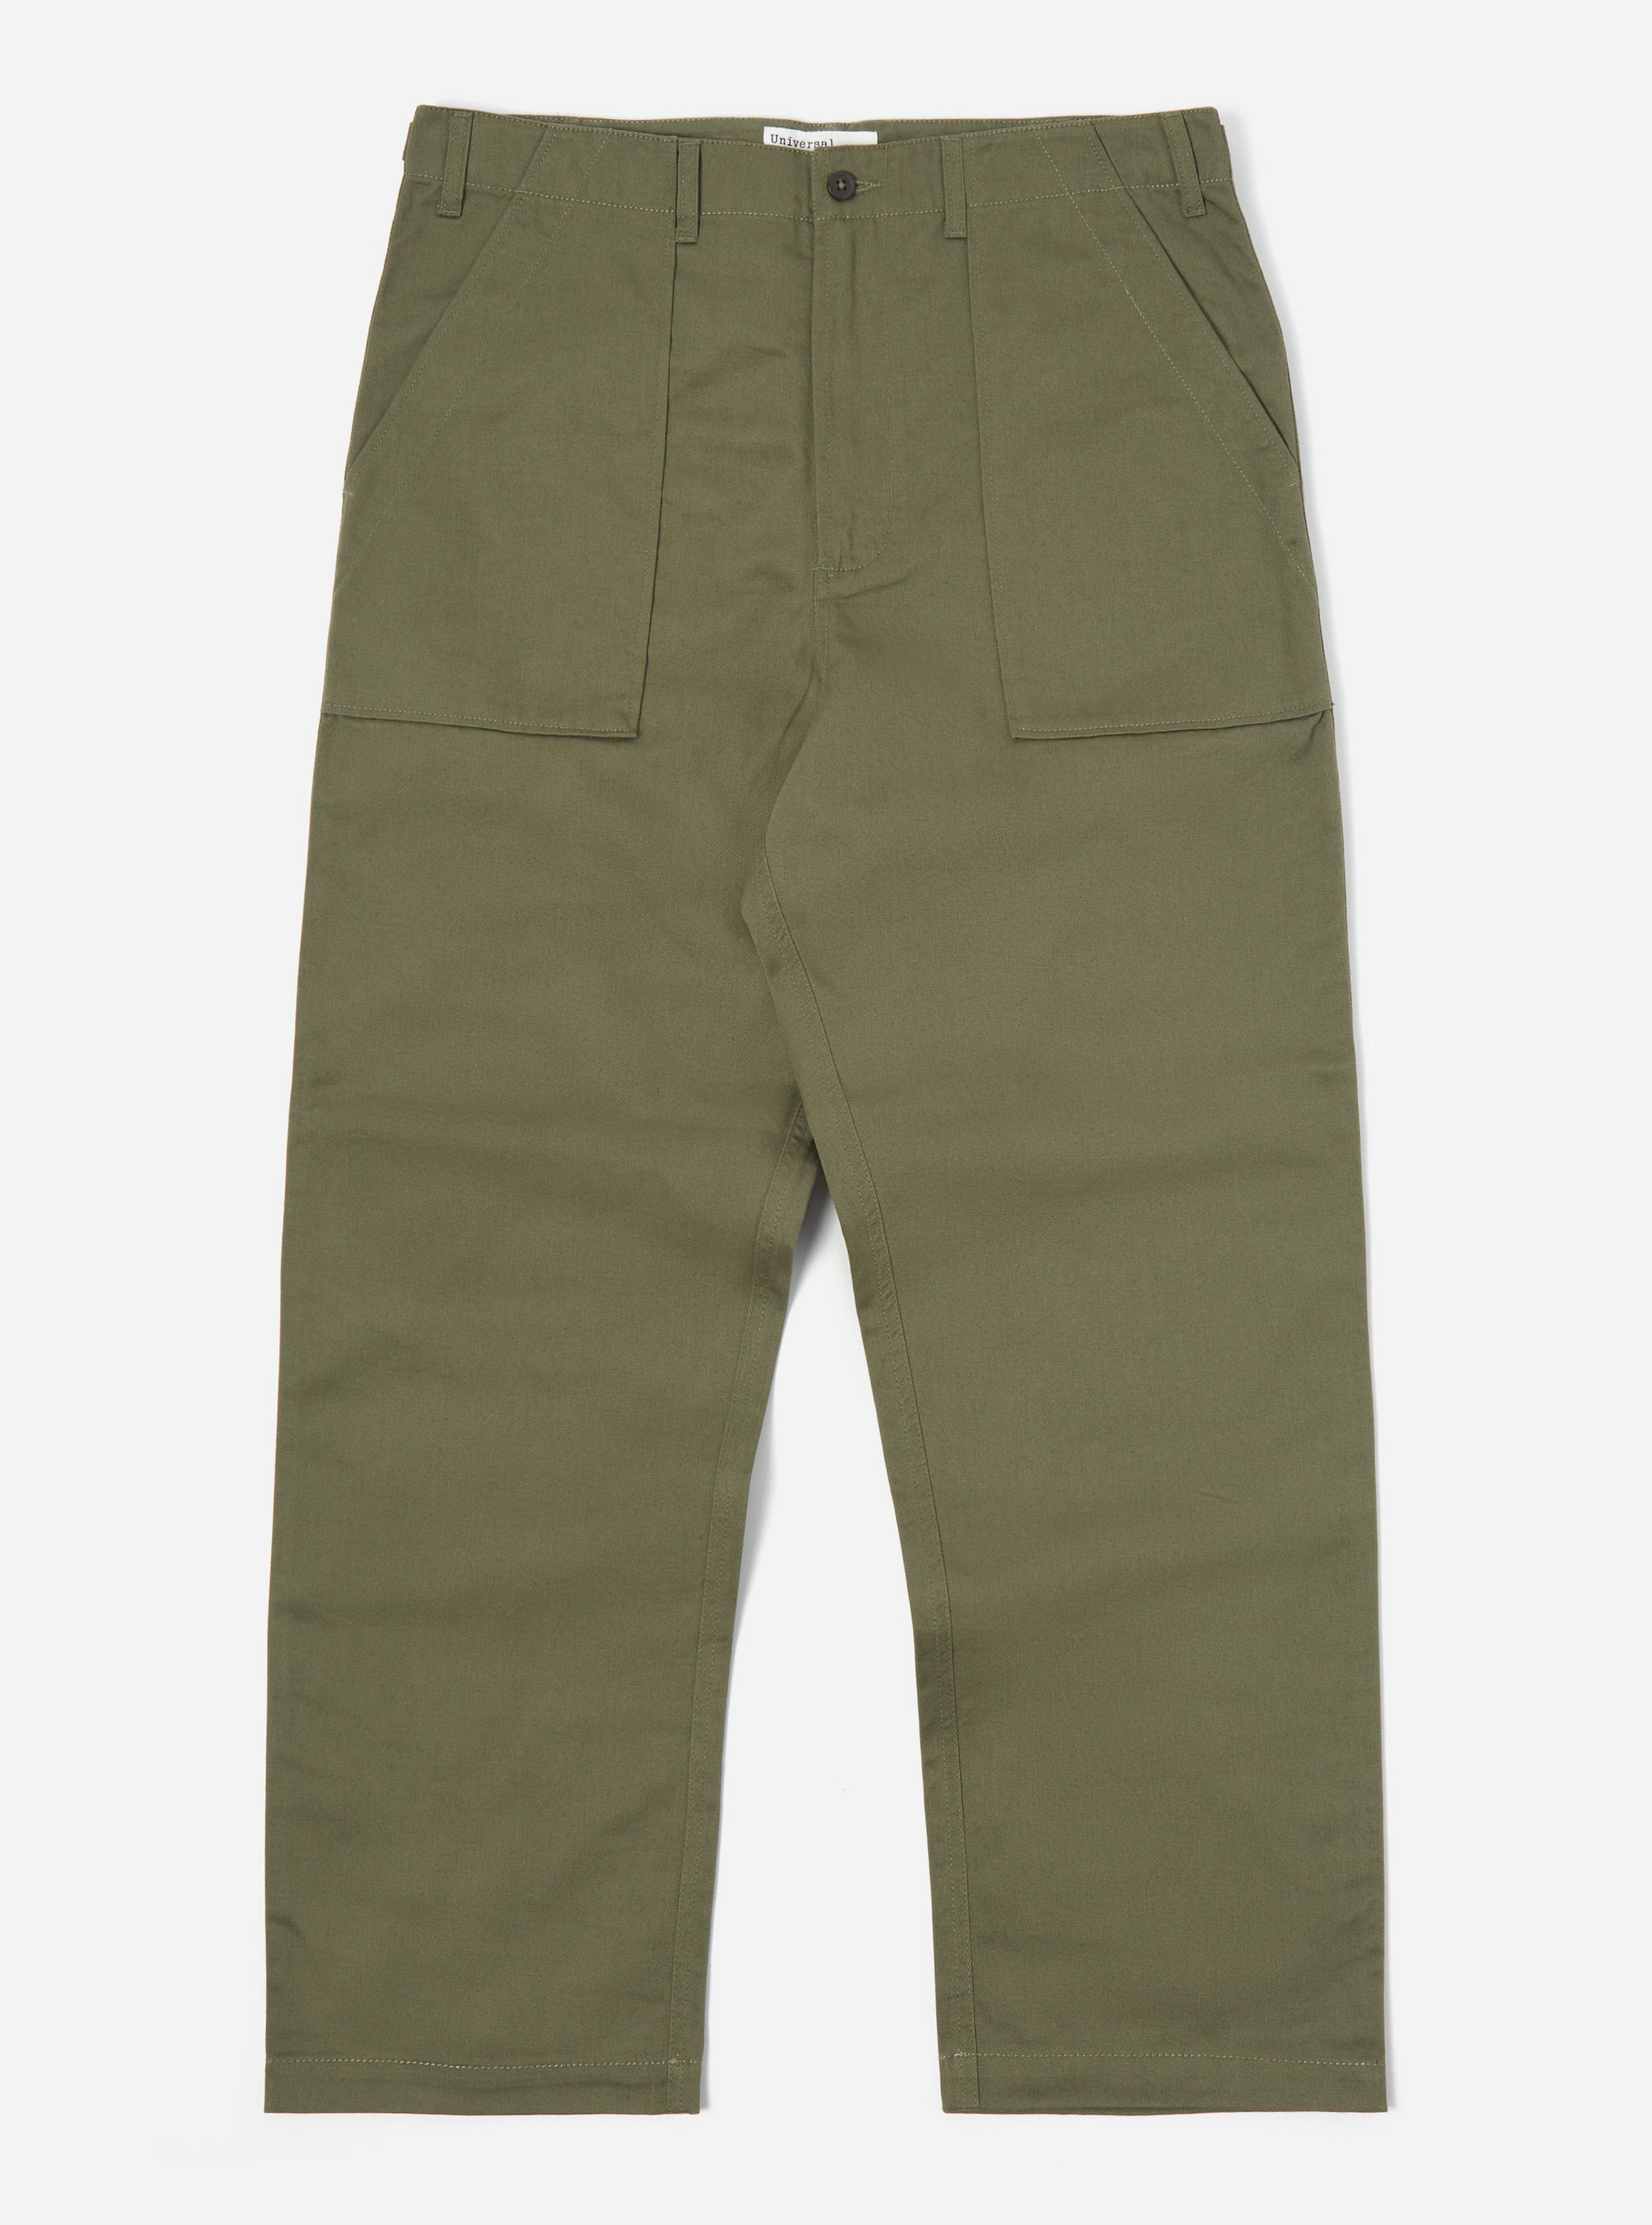 Buy Olive Green Trousers & Pants for Men by Ruggers Online | Ajio.com